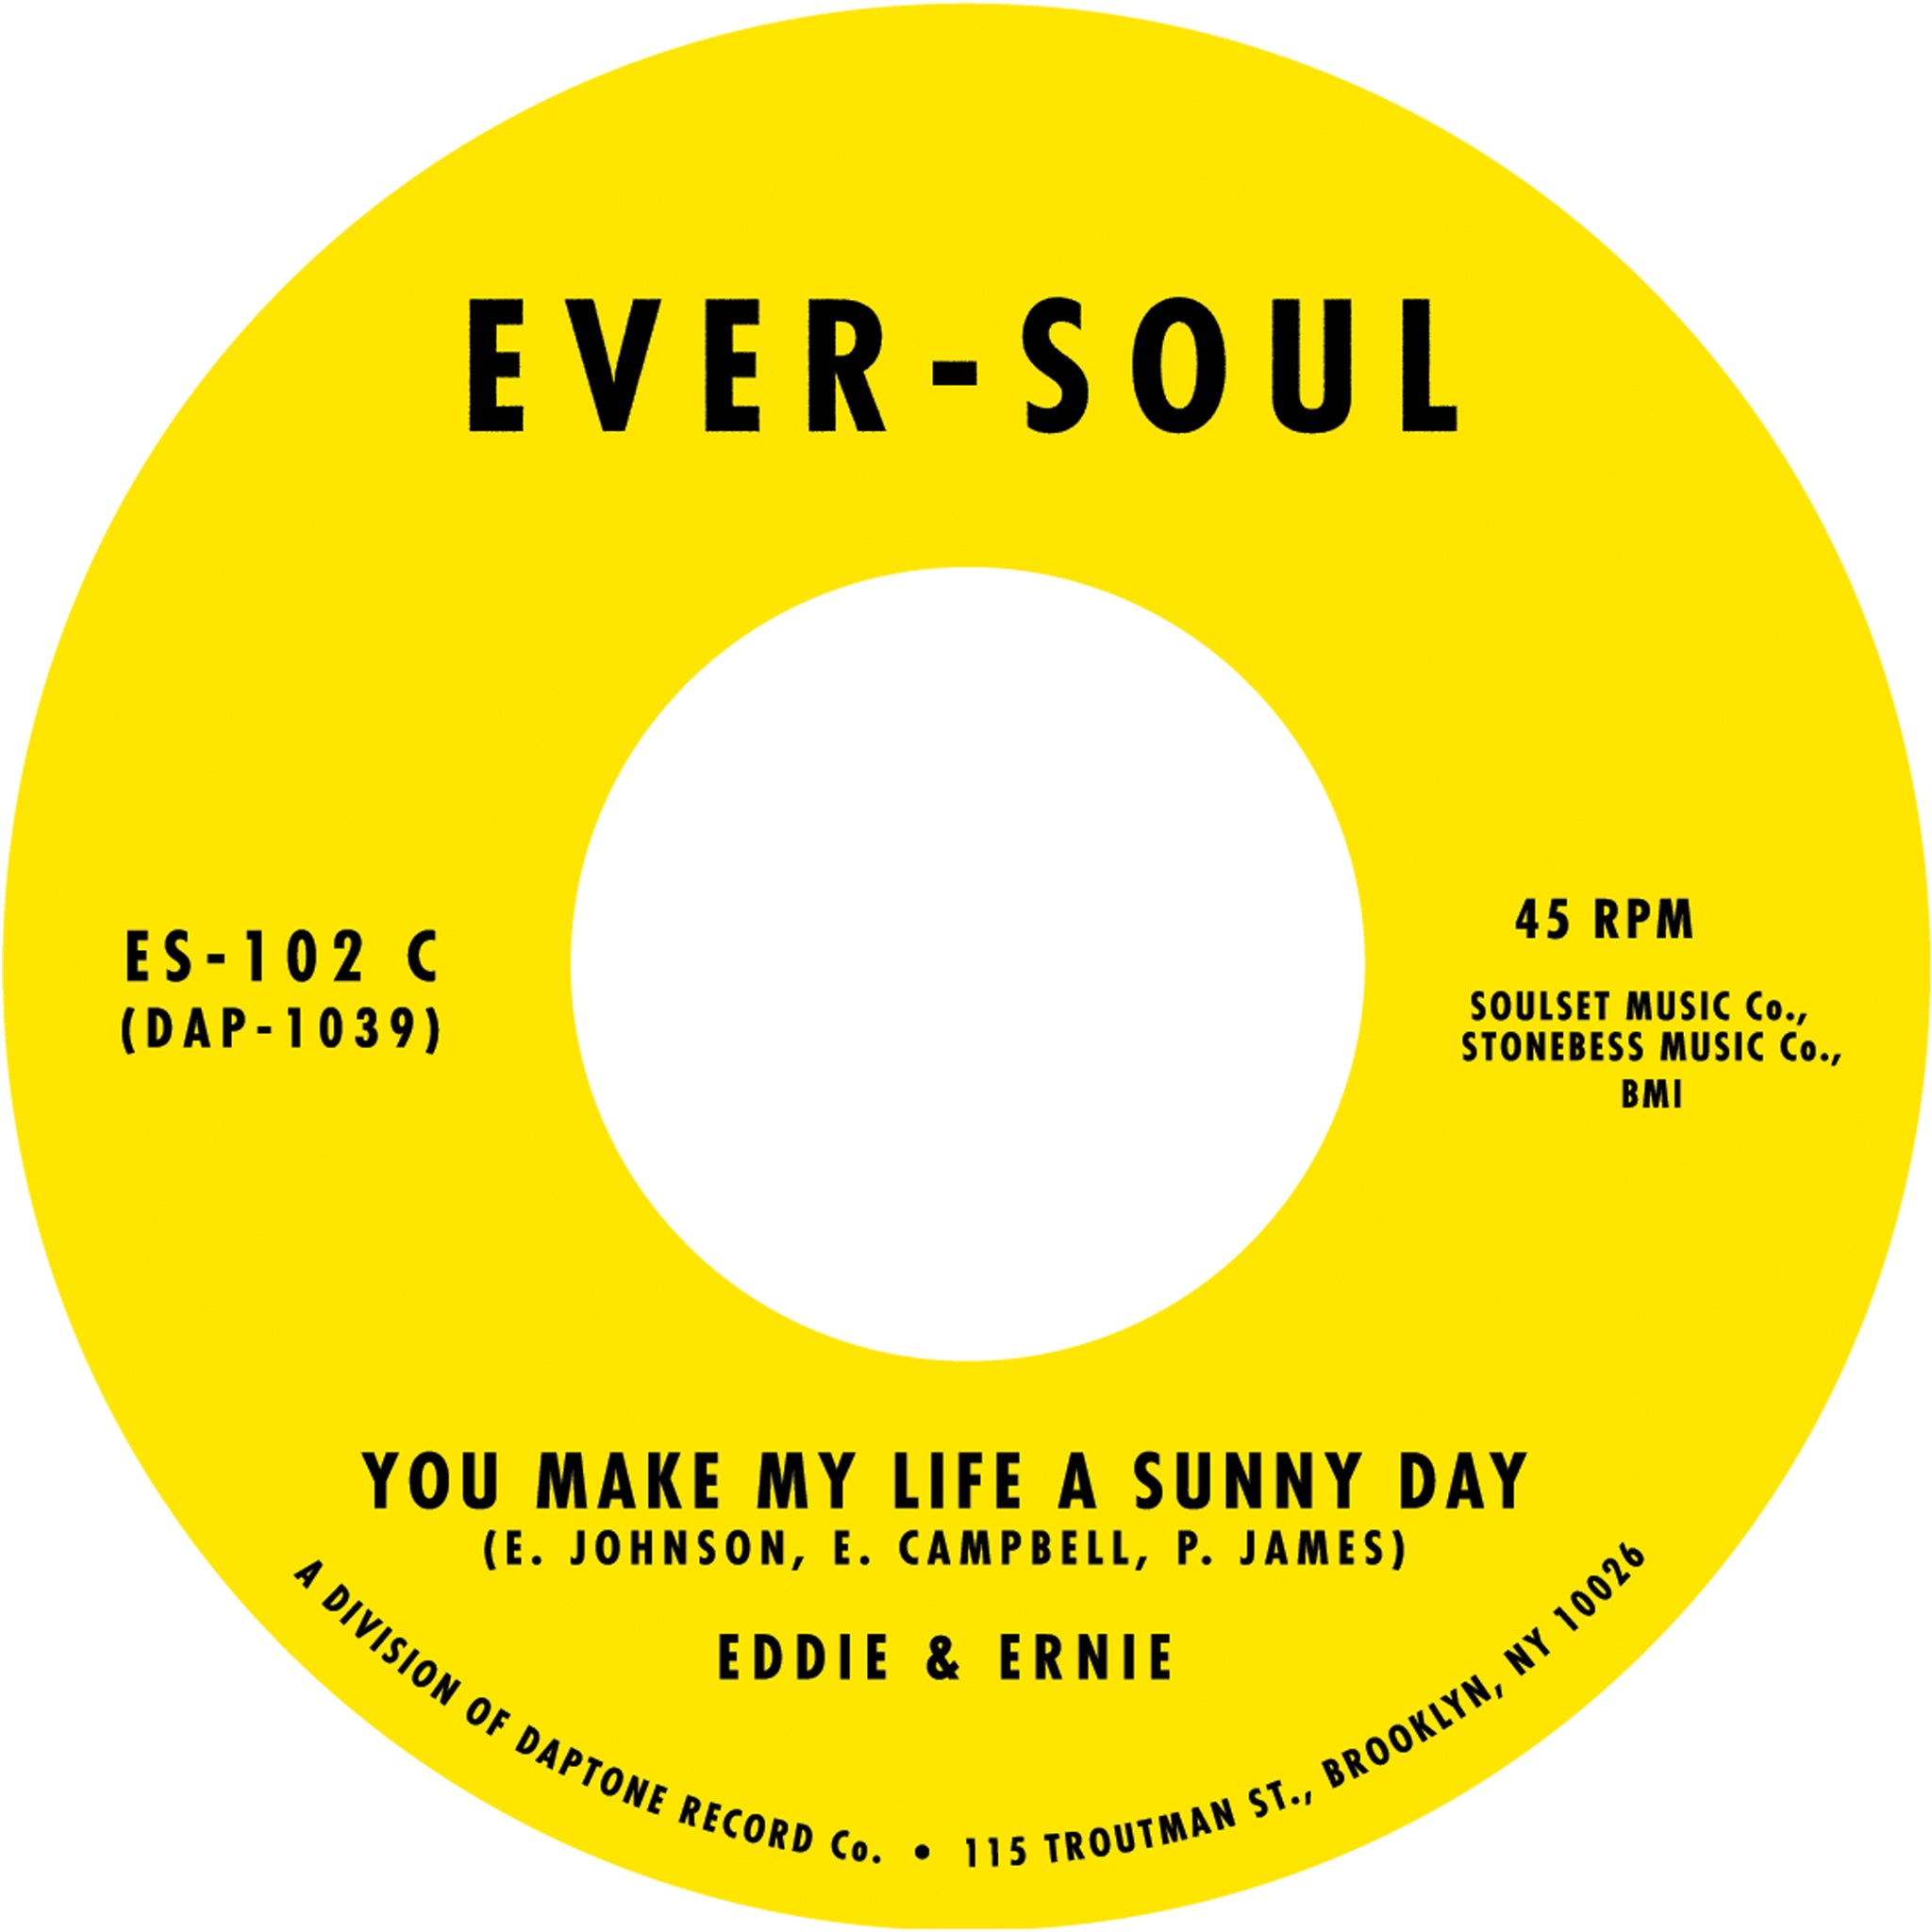 Eddie & Ernie - Bullets Don't Have Eyes b/w You Make My Life A Sunny Day